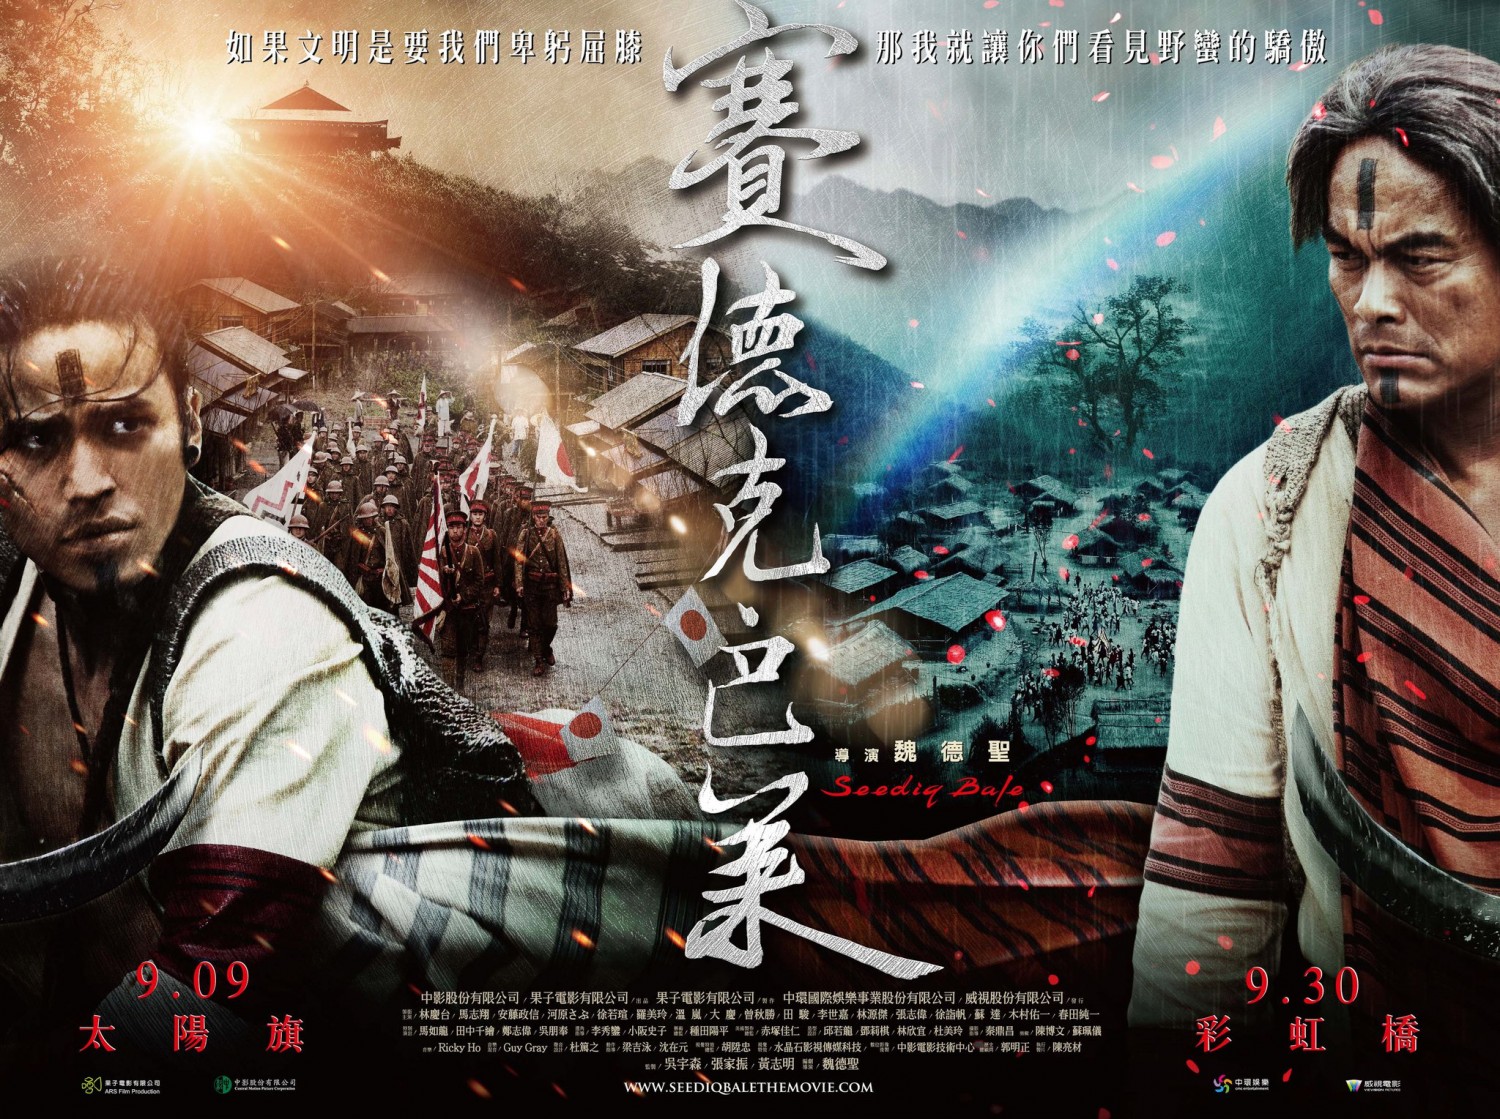 Extra Large Movie Poster Image for Seediq Bale